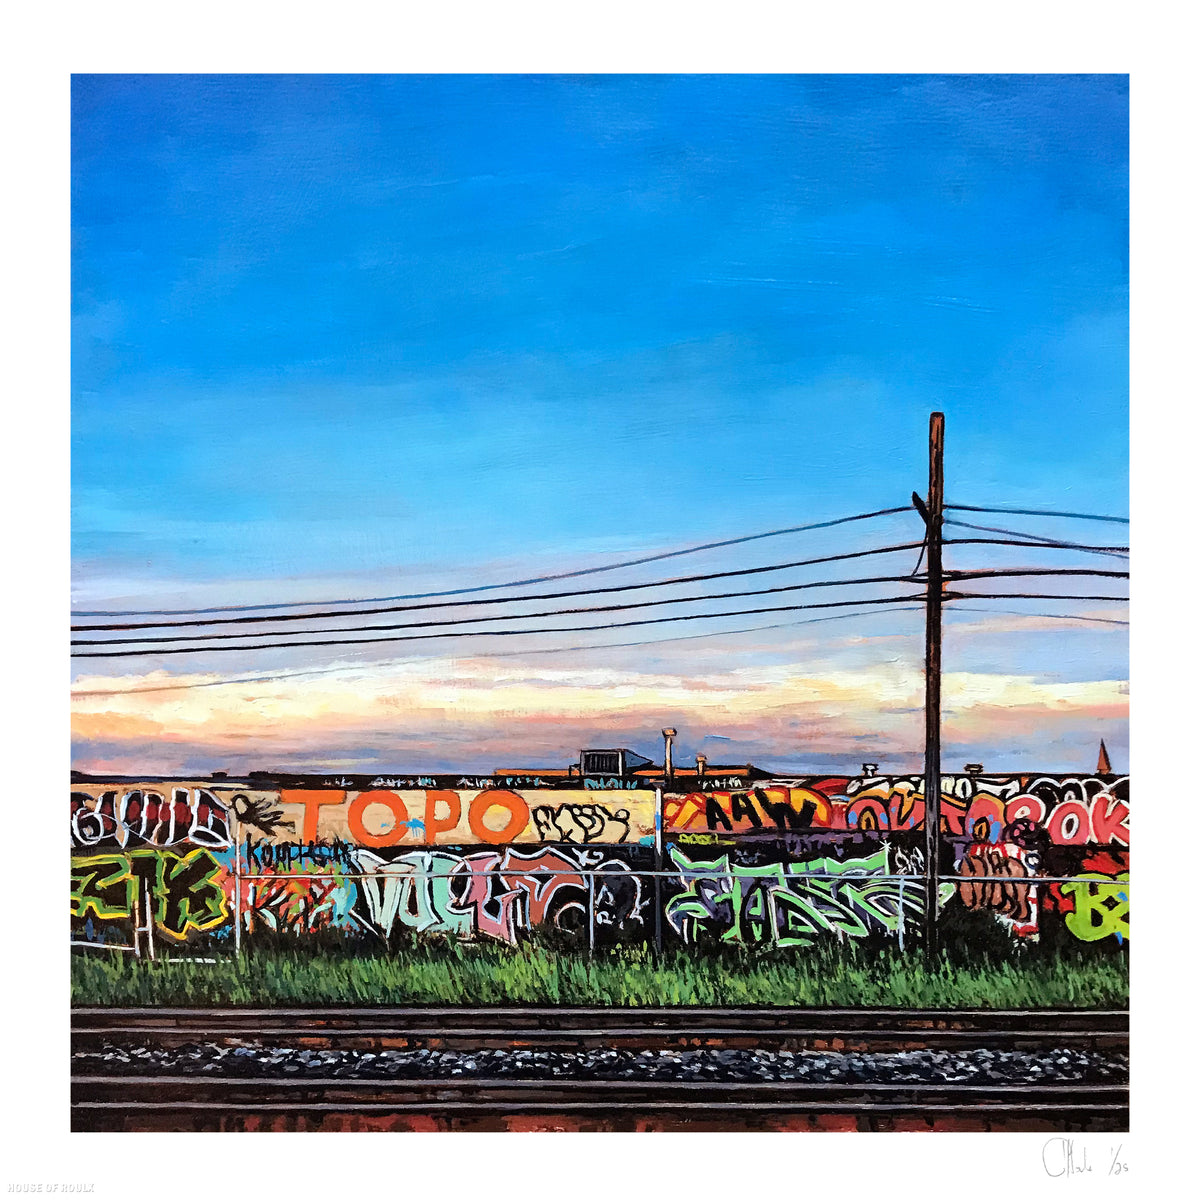 Andrew Houle &quot;Free Wall II&quot; - Archival Print, Limited Edition of 25 - 17 x 17&quot;